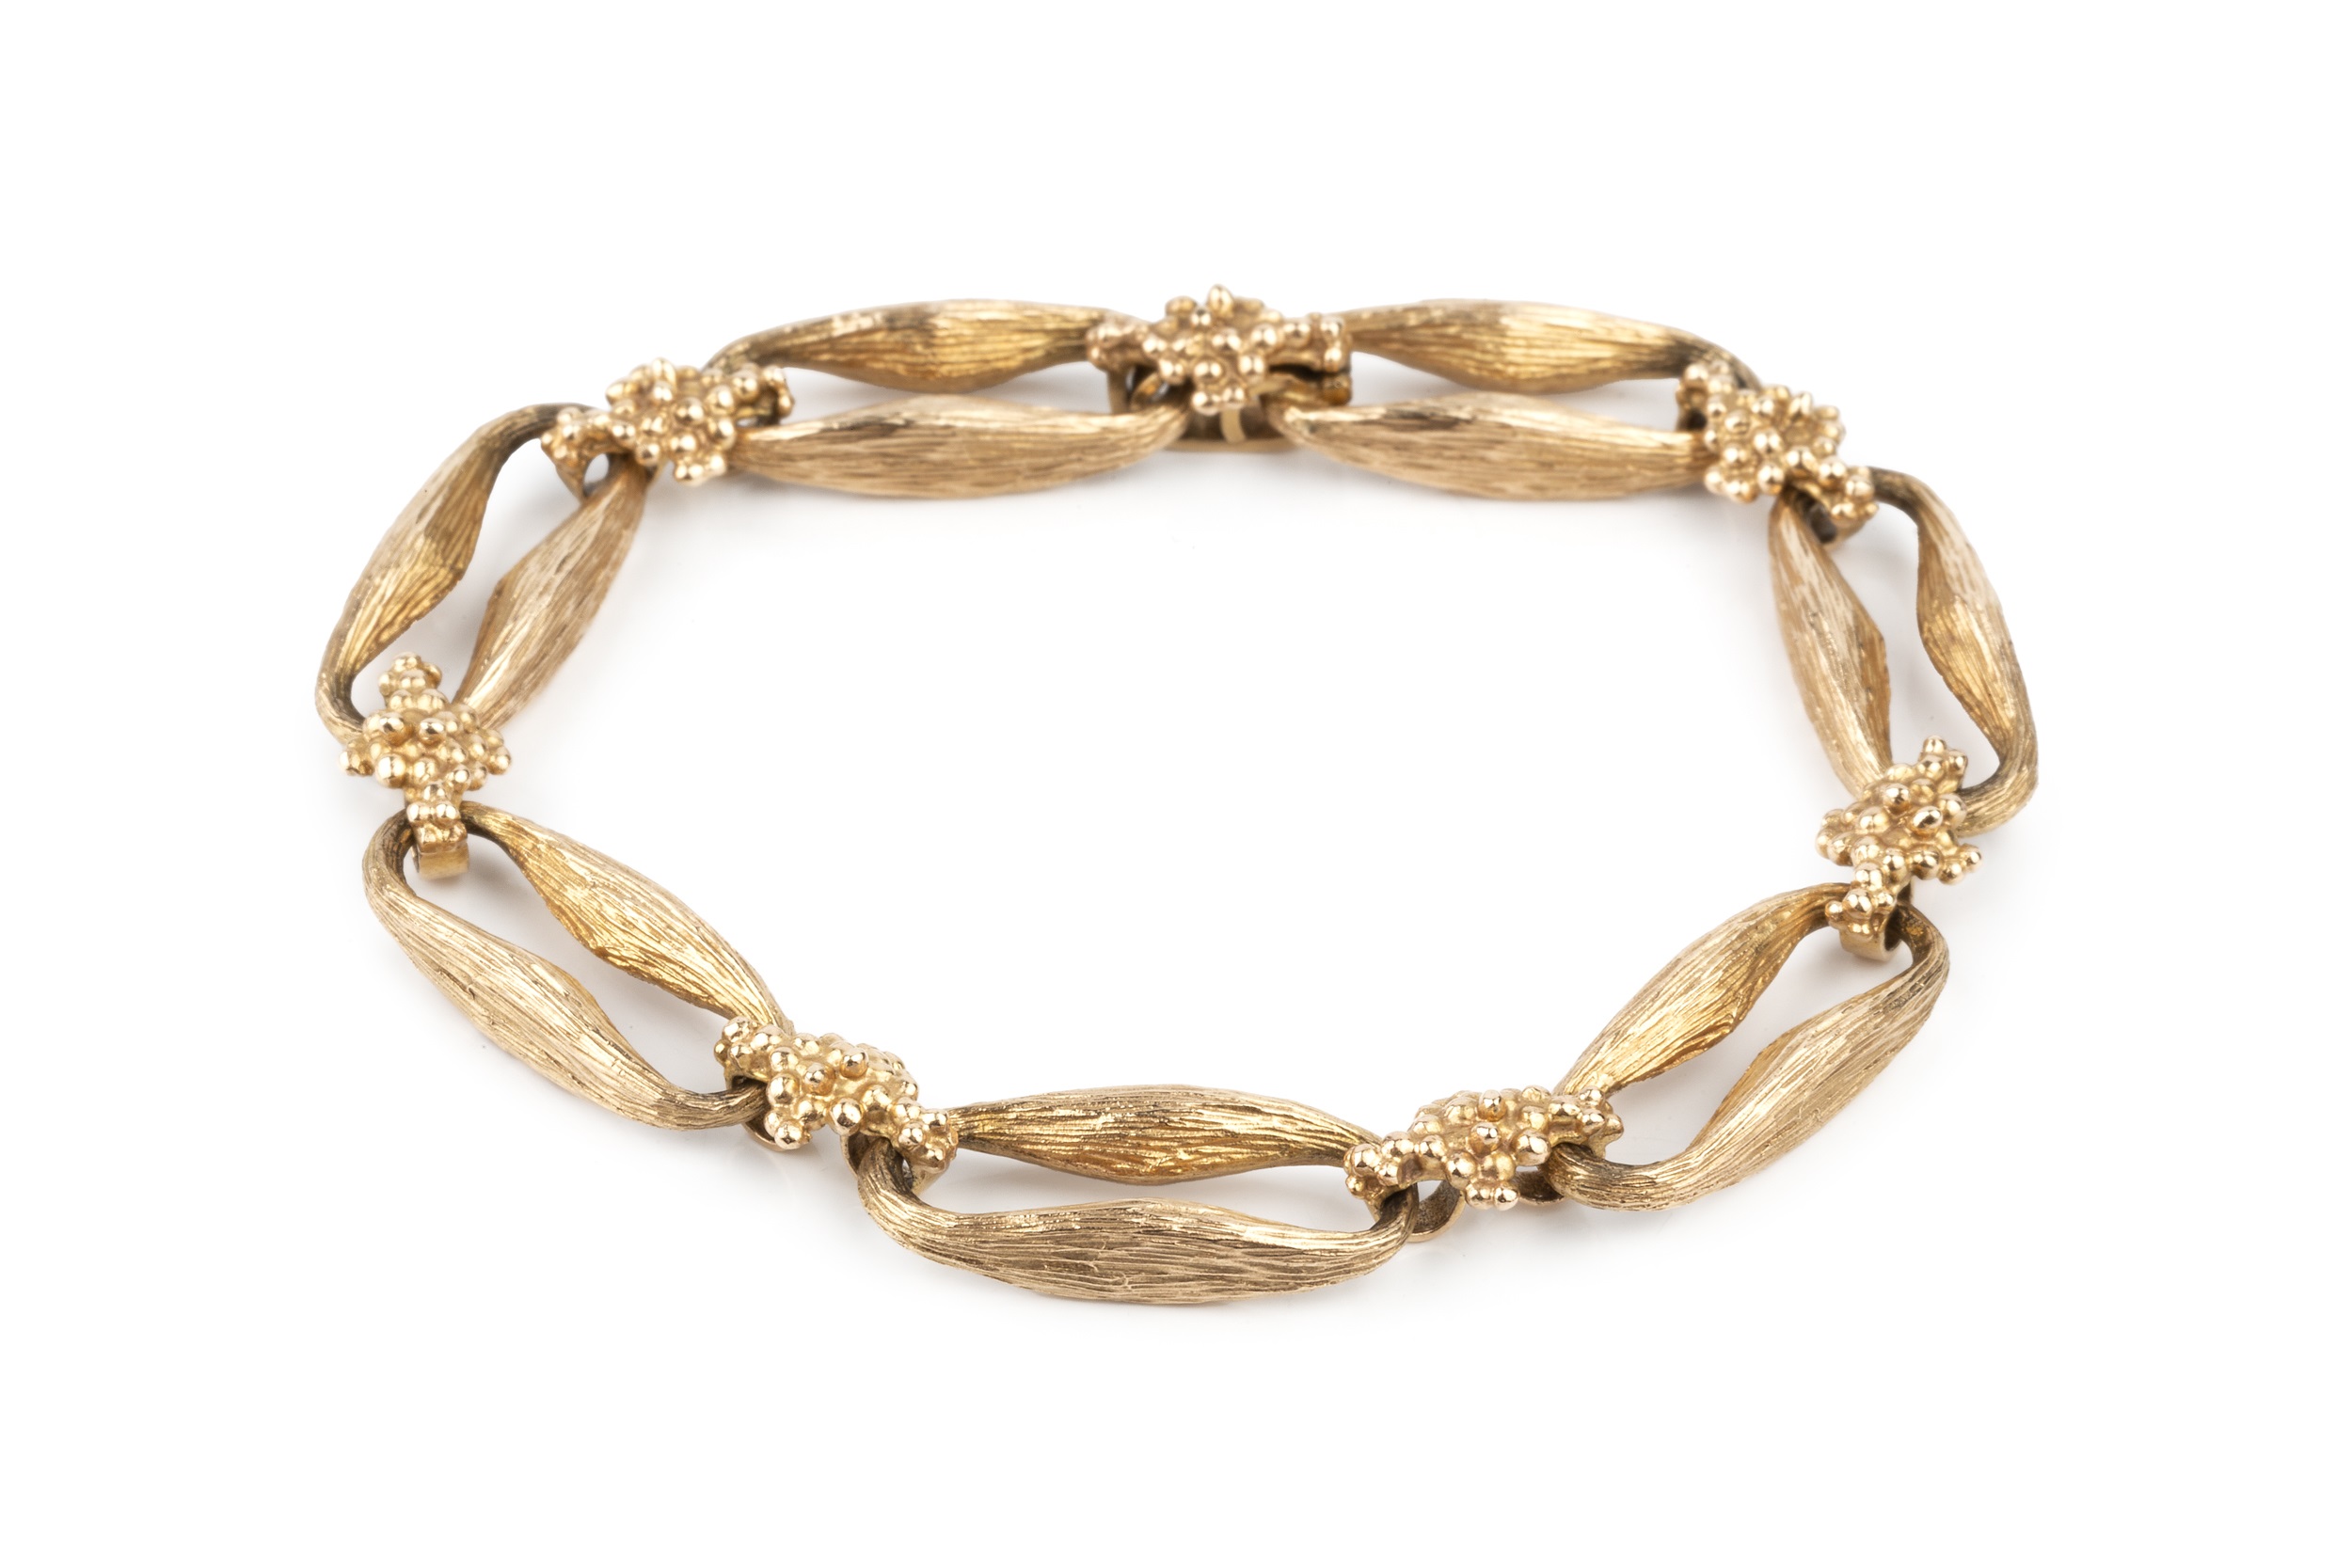 A 9ct gold bracelet, formed of shaped and textured elongated oval links with cluster spacers